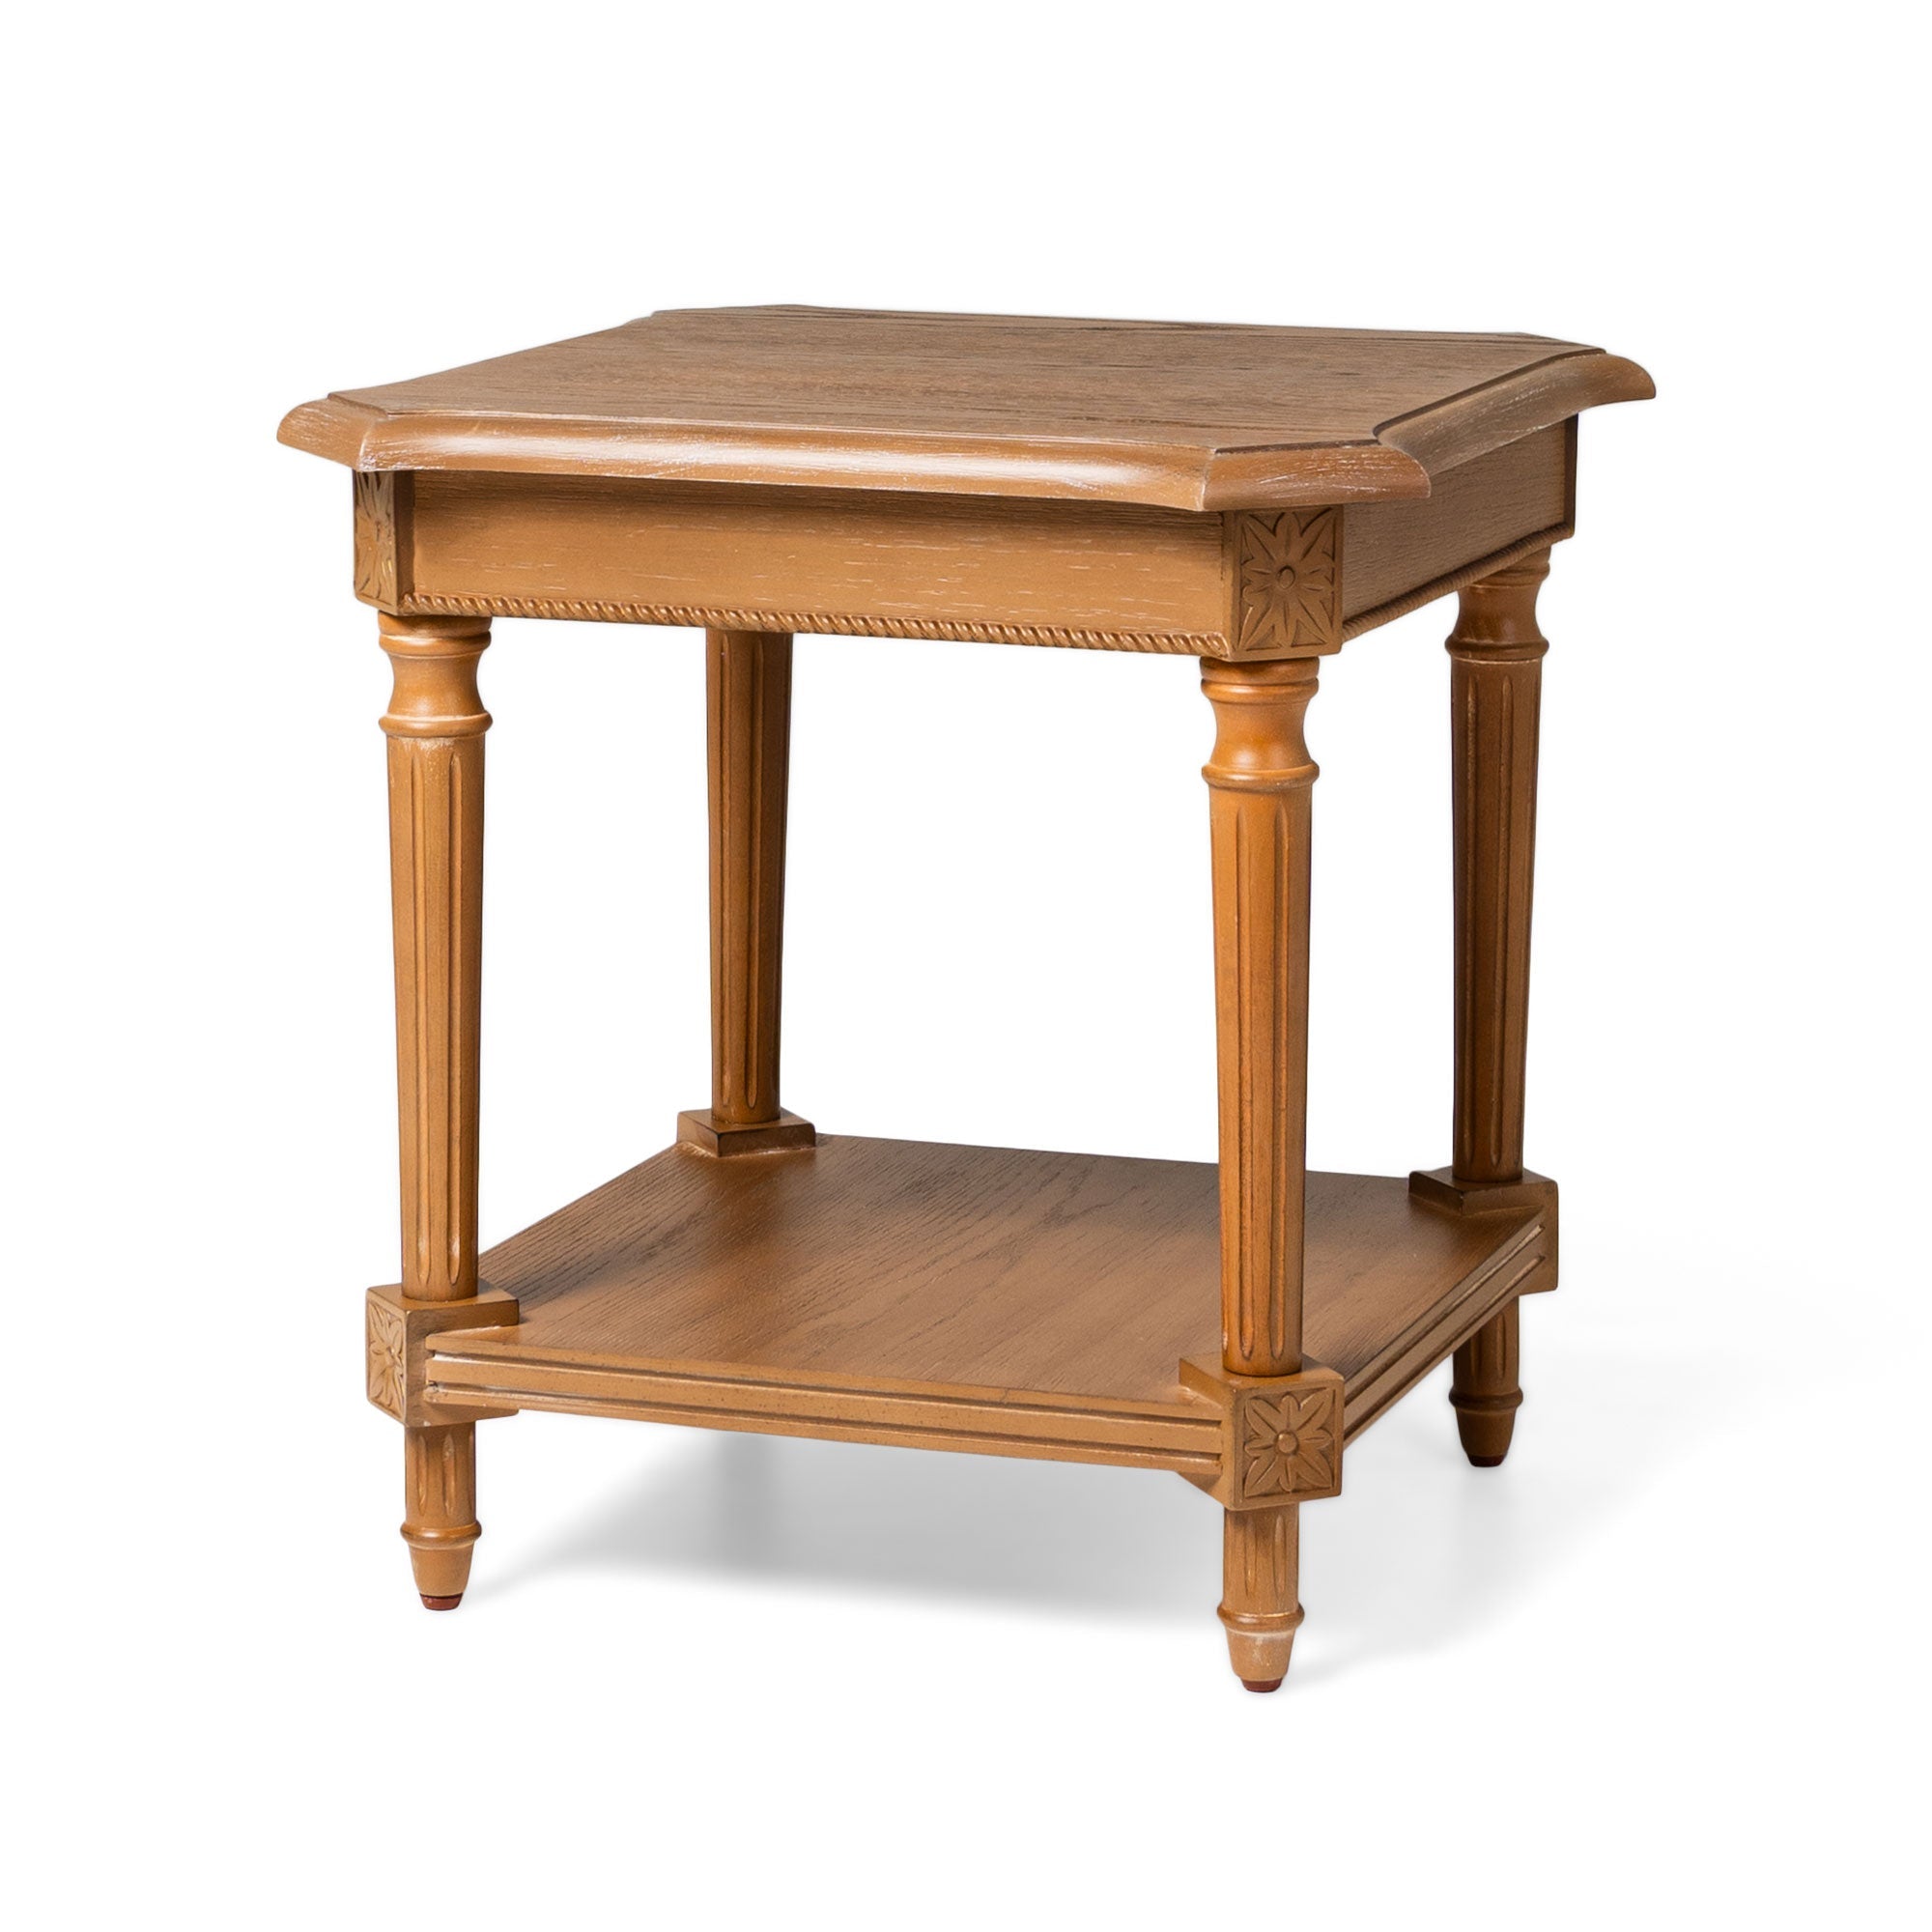 Pullman Traditional Square Wooden Side Table in Antiqued Natural Finish in Accent Tables by Maven Lane